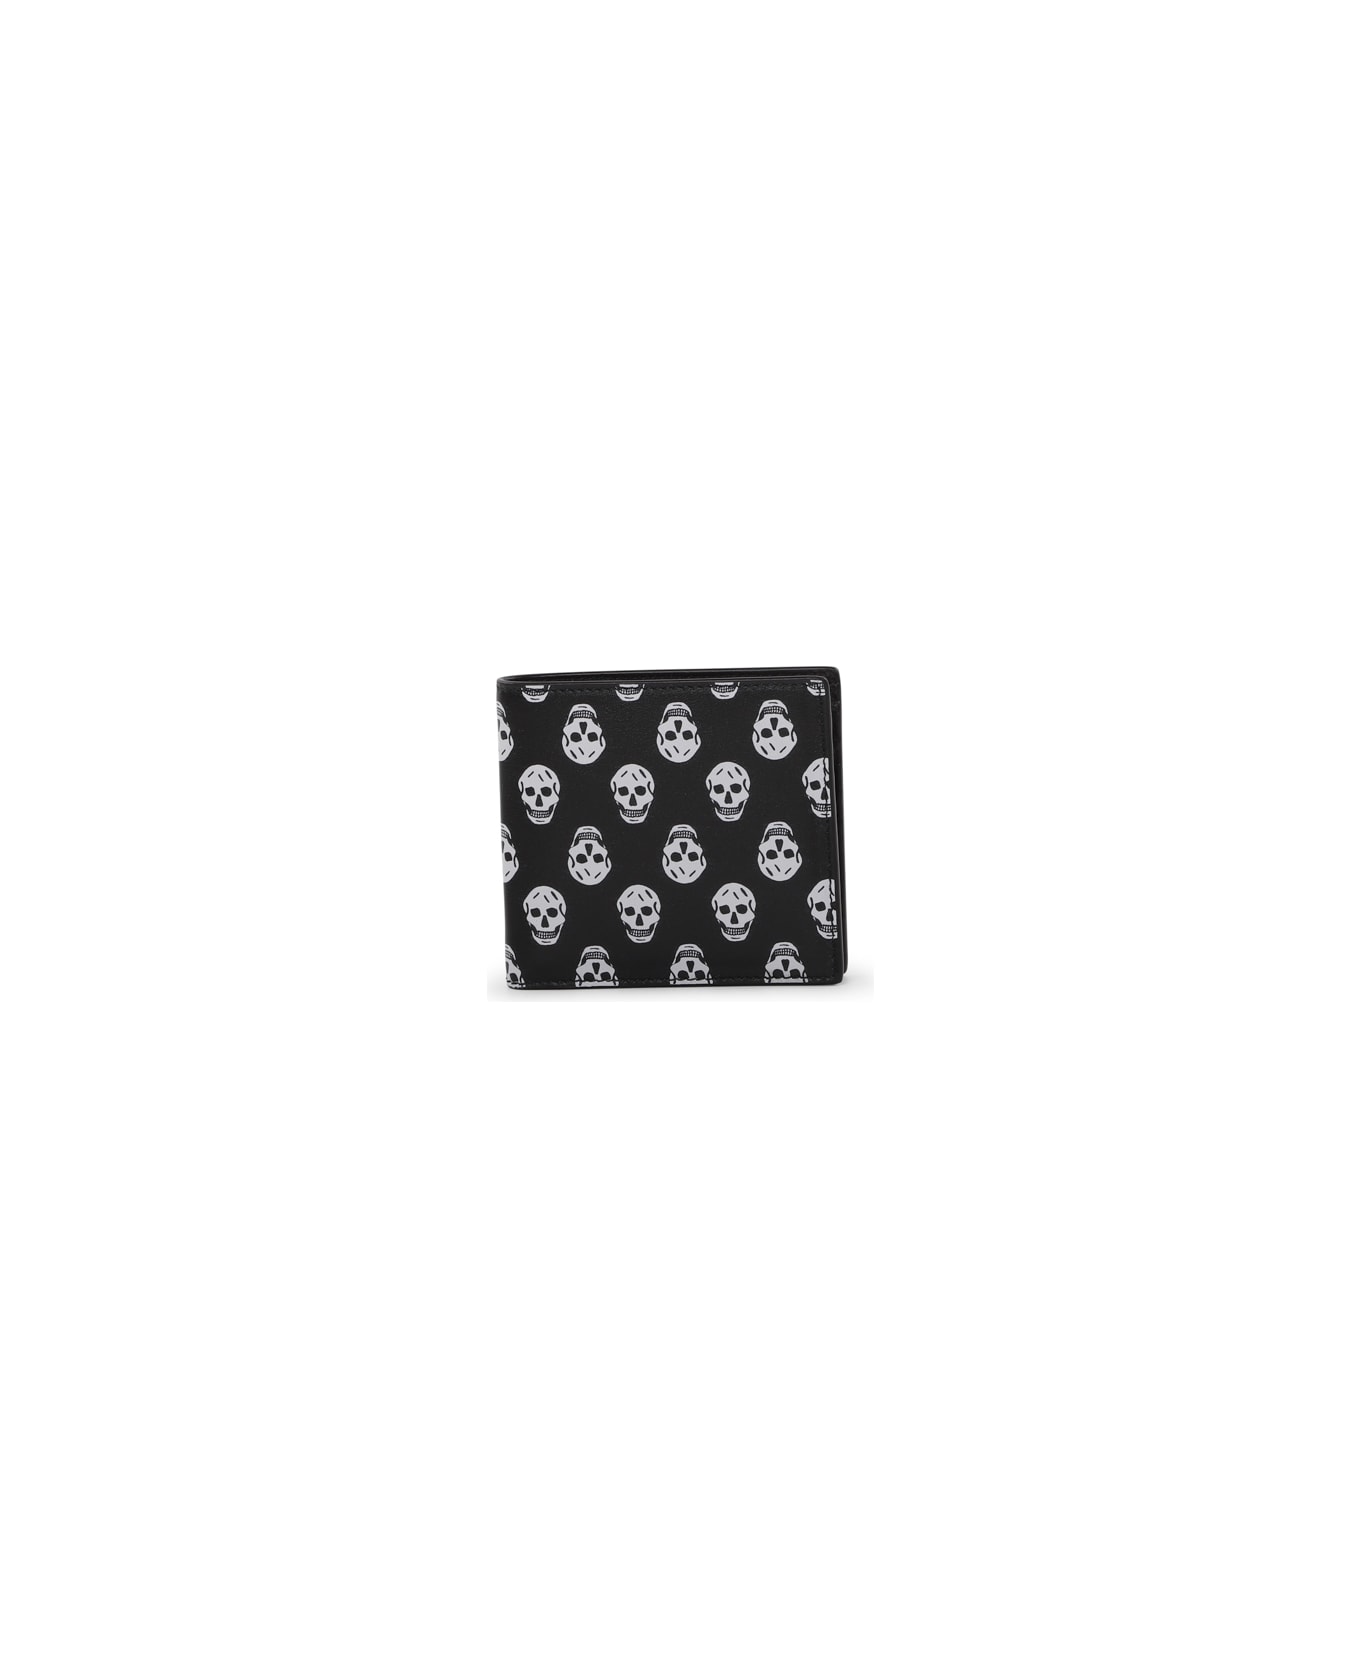 Alexander McQueen Leather Wallet With Skull Print - Black/white